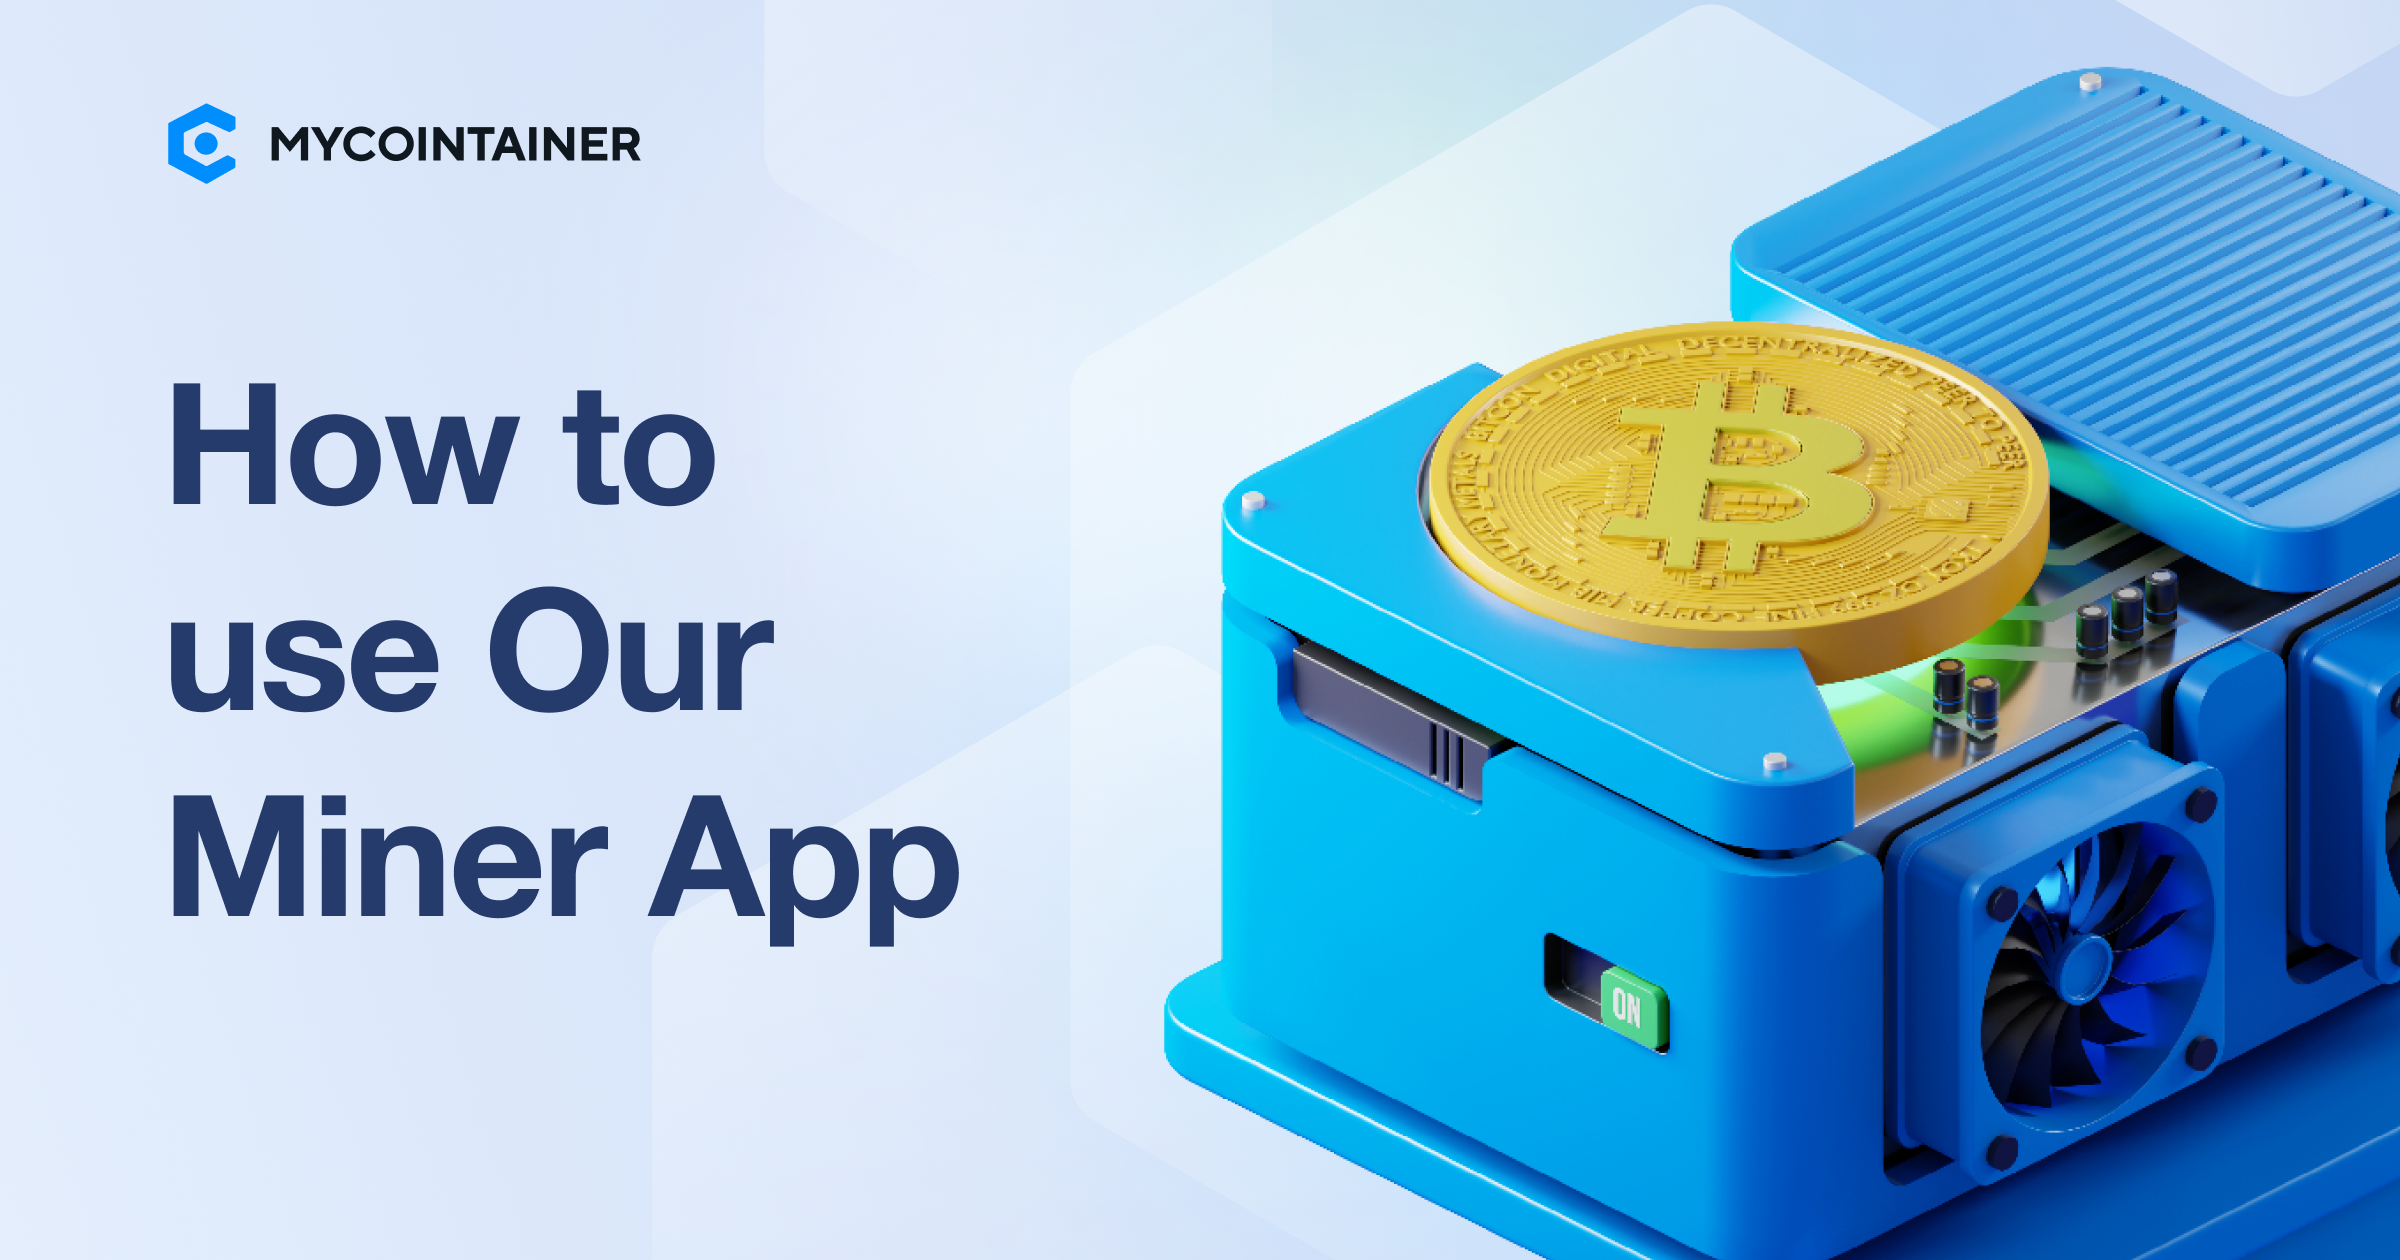 How to use MyCointainer's Miner App? Step by step guide.